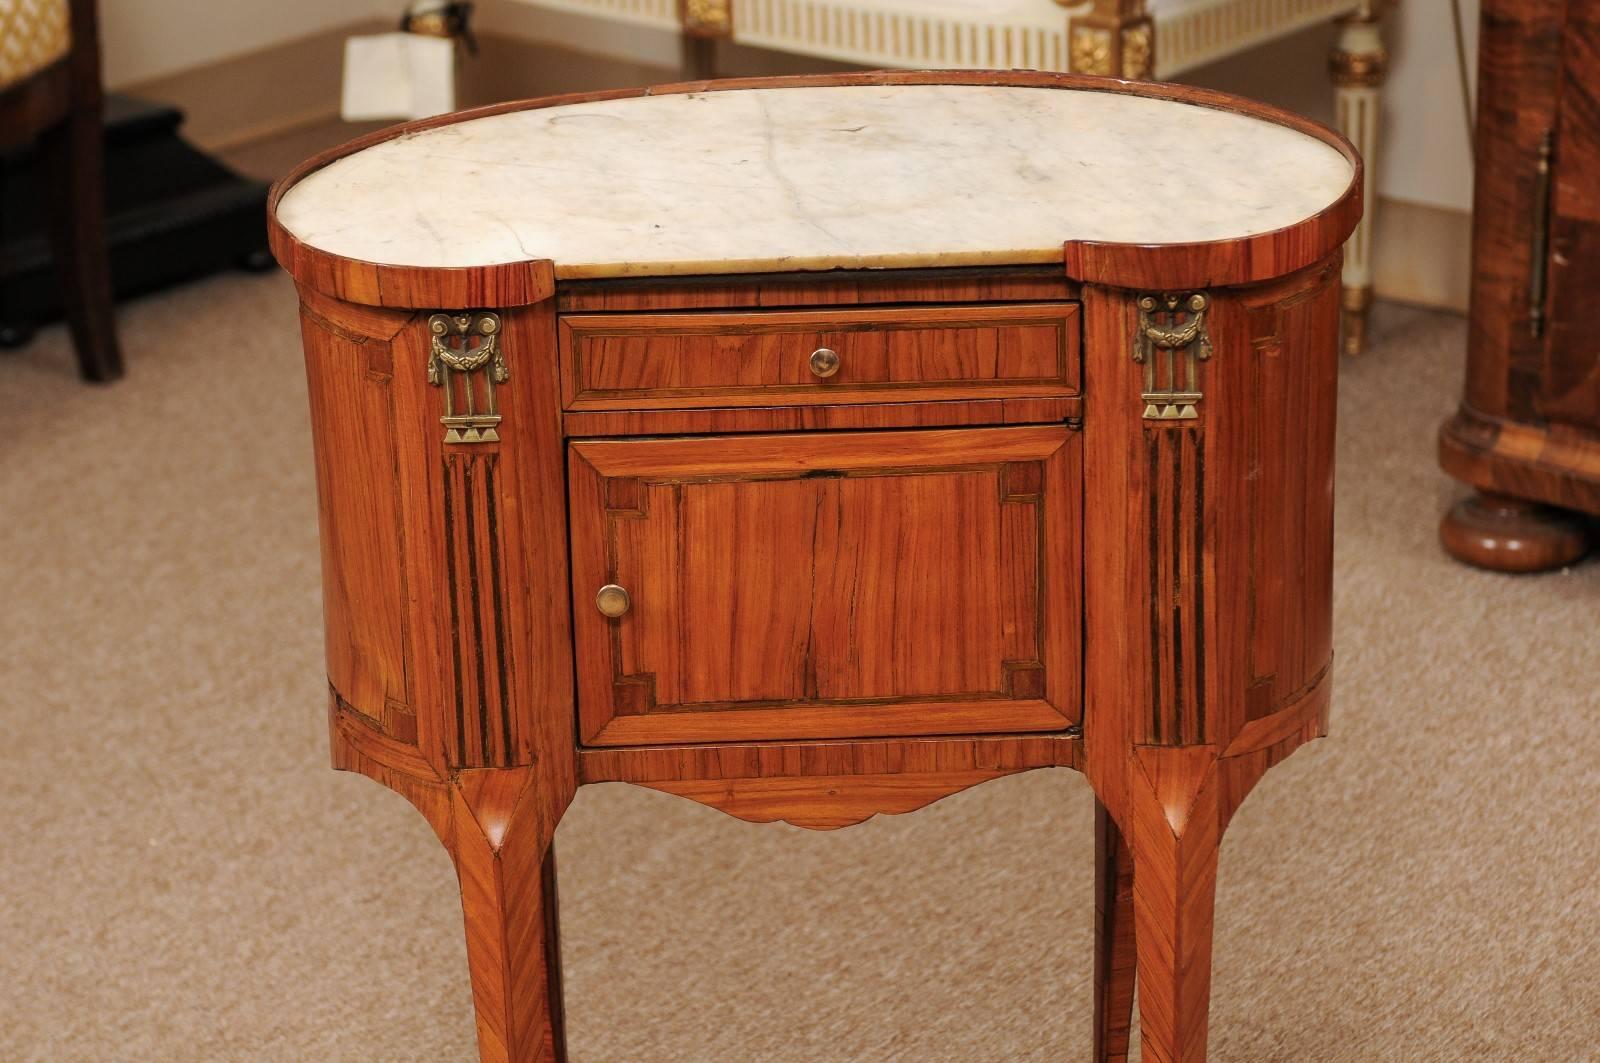 18th Century French Louis XVI Period Kidney Shaped Tulipwood Table with Marble For Sale 3